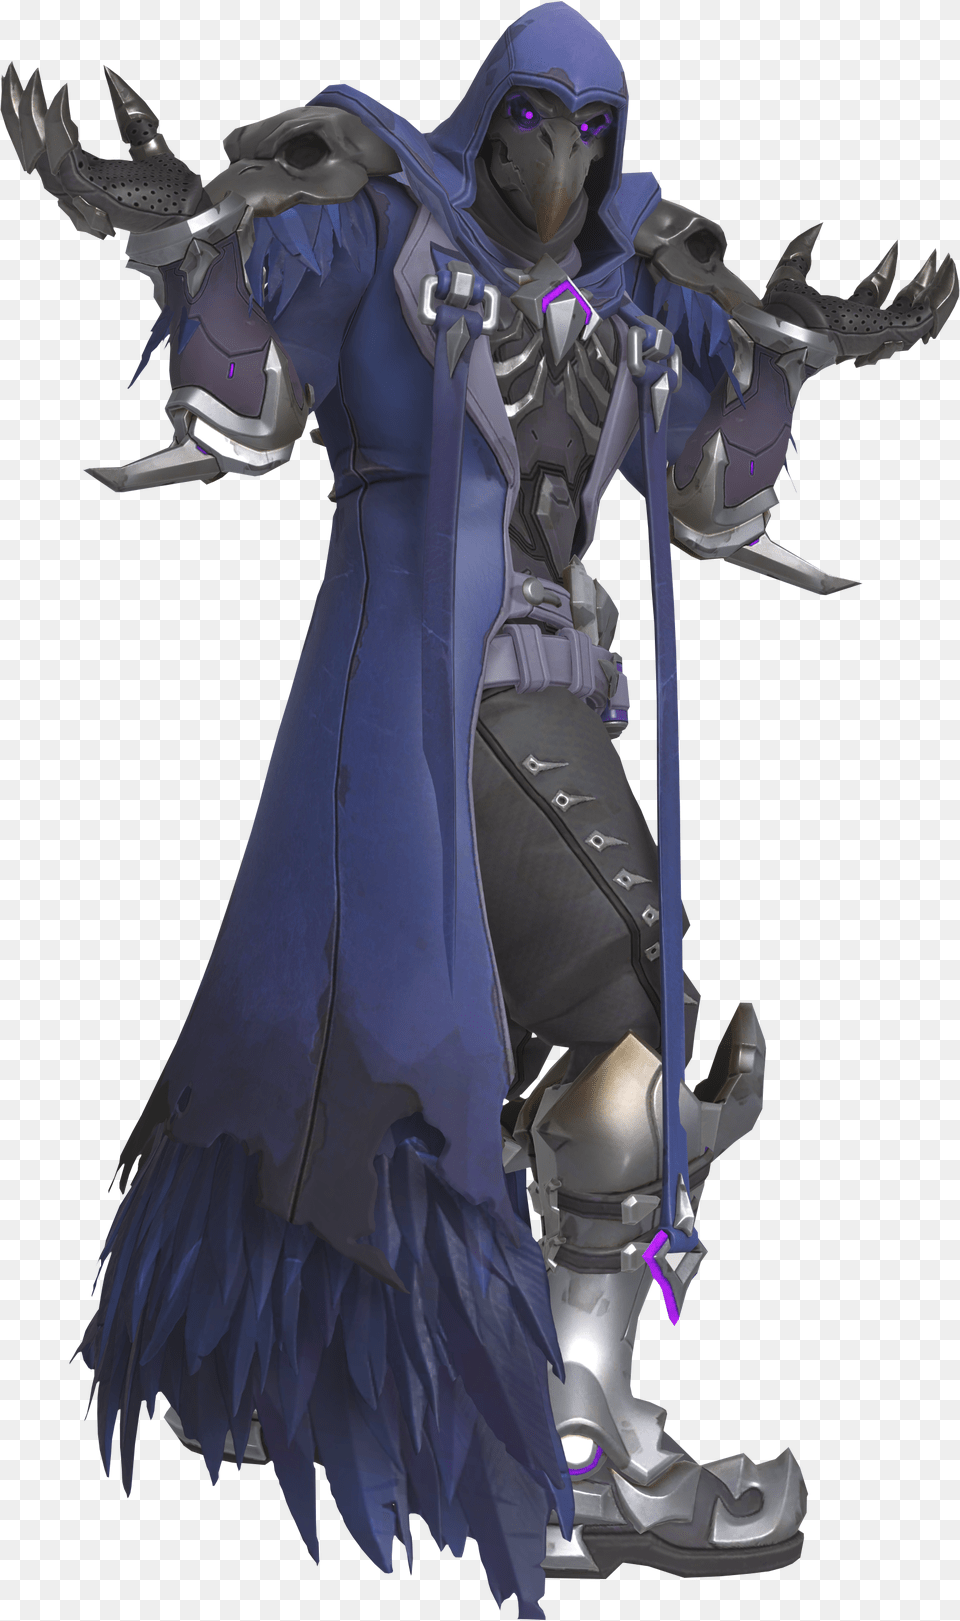 Overwatch Reaper Reaper Raven Skin Overwatch, Adult, Bride, Female, Person Png Image